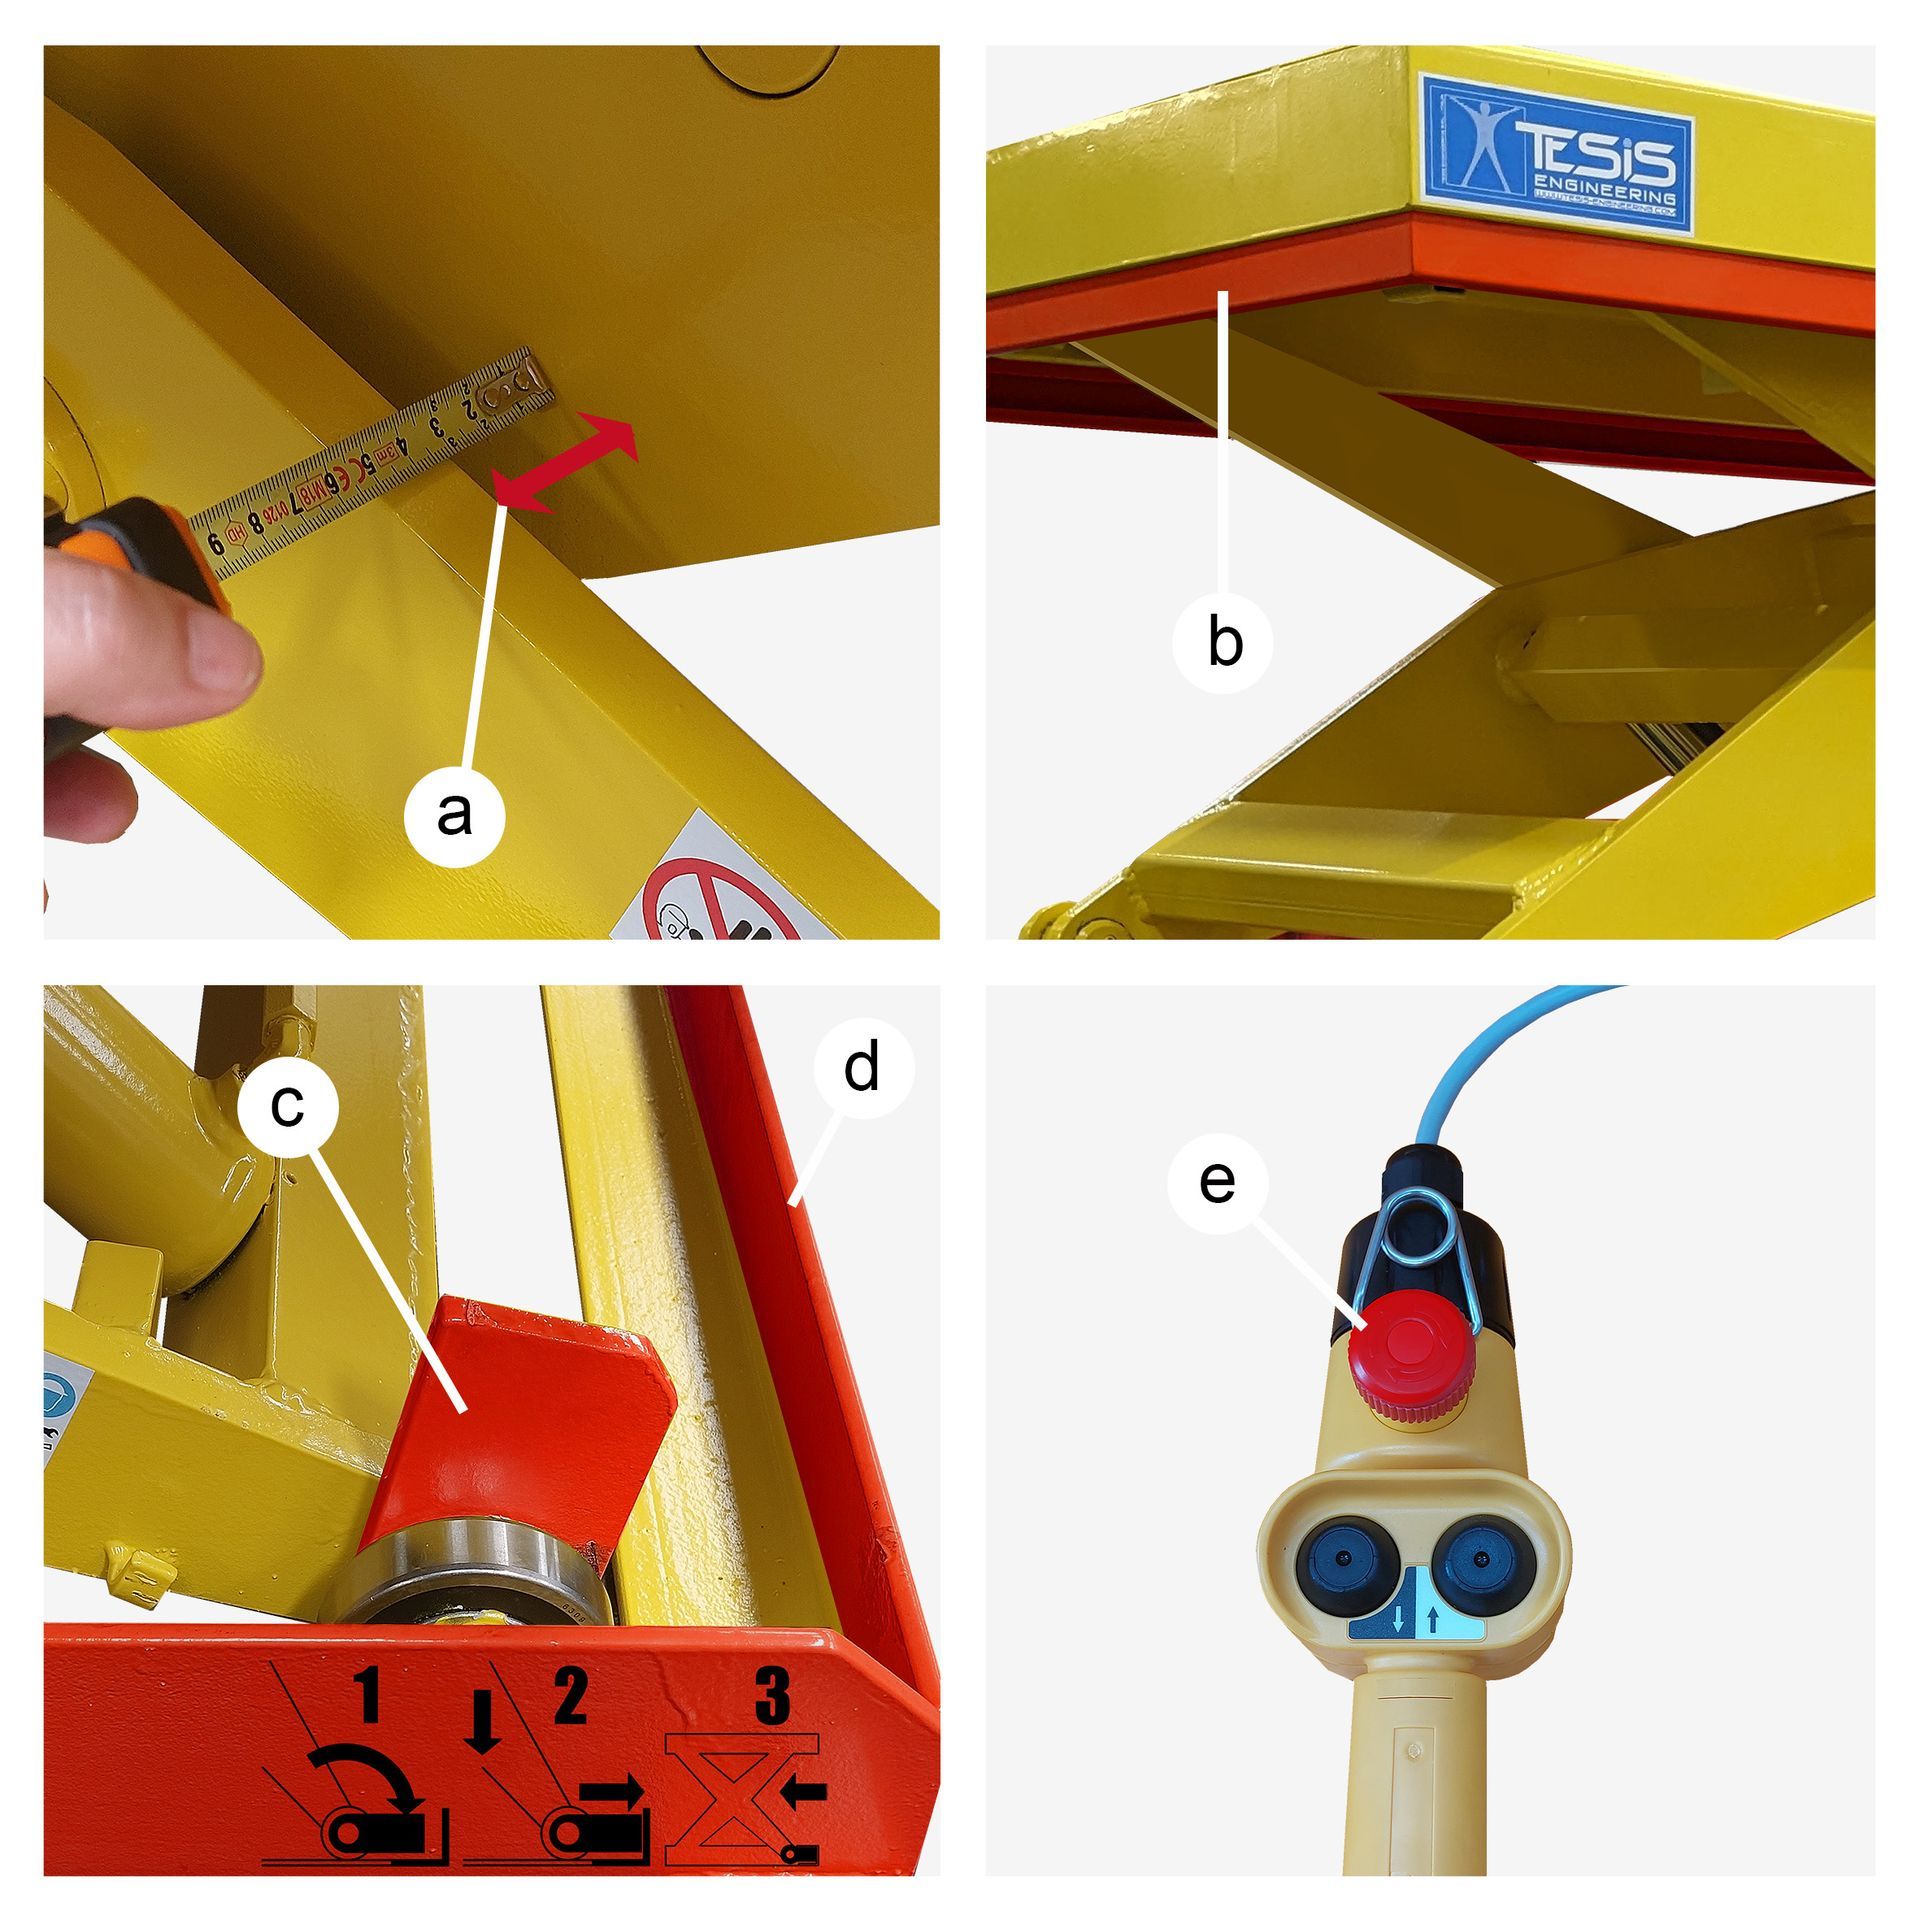 Lift table safety features